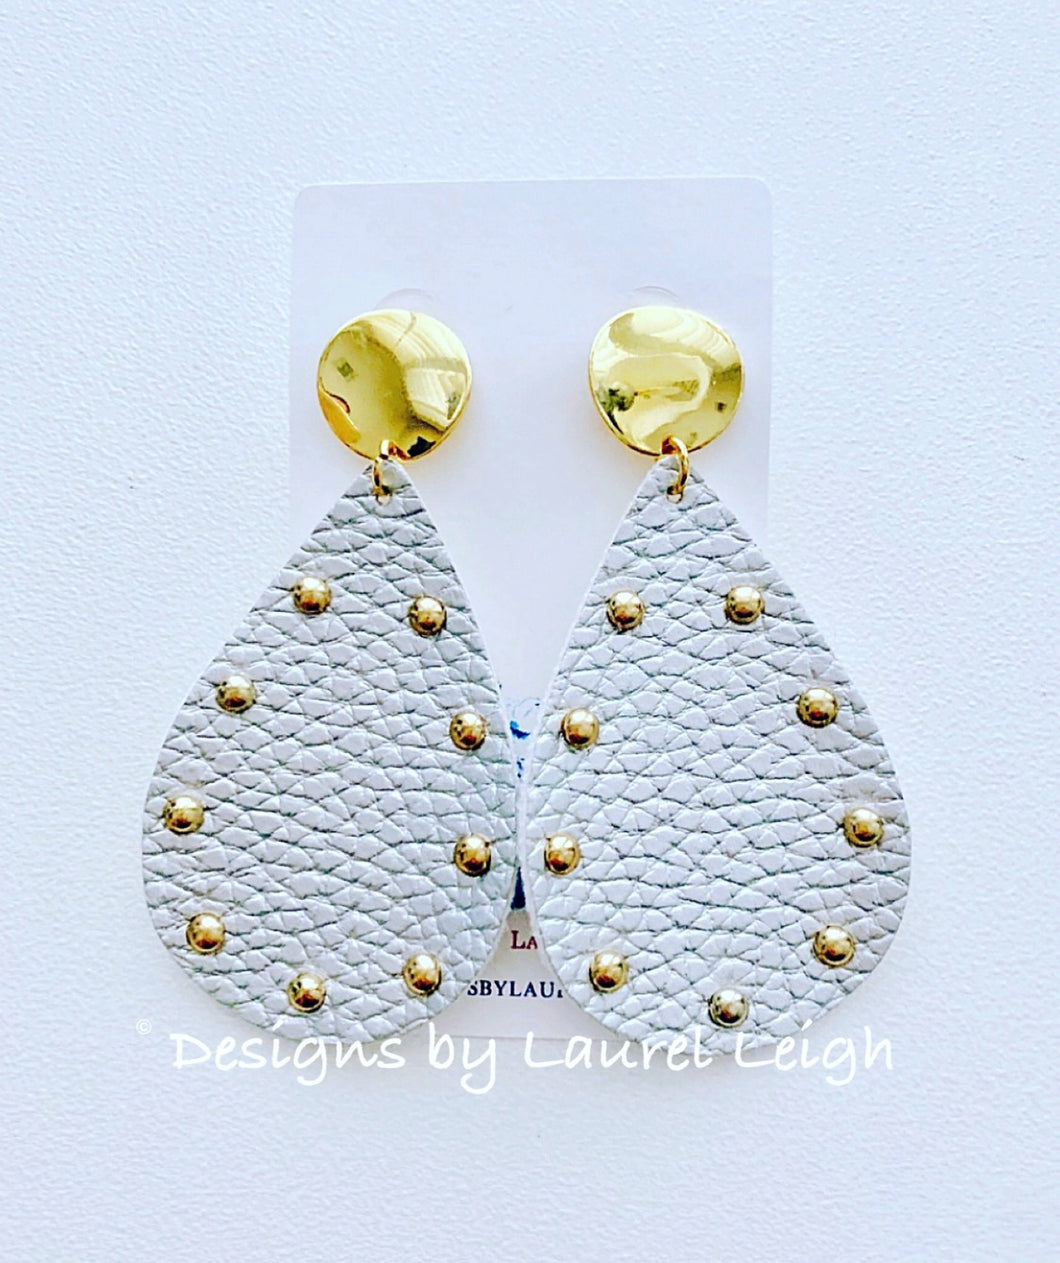 Silver and Gold Two-tone Faux Leather Studded Statement Earrings - Designs by Laurel Leigh